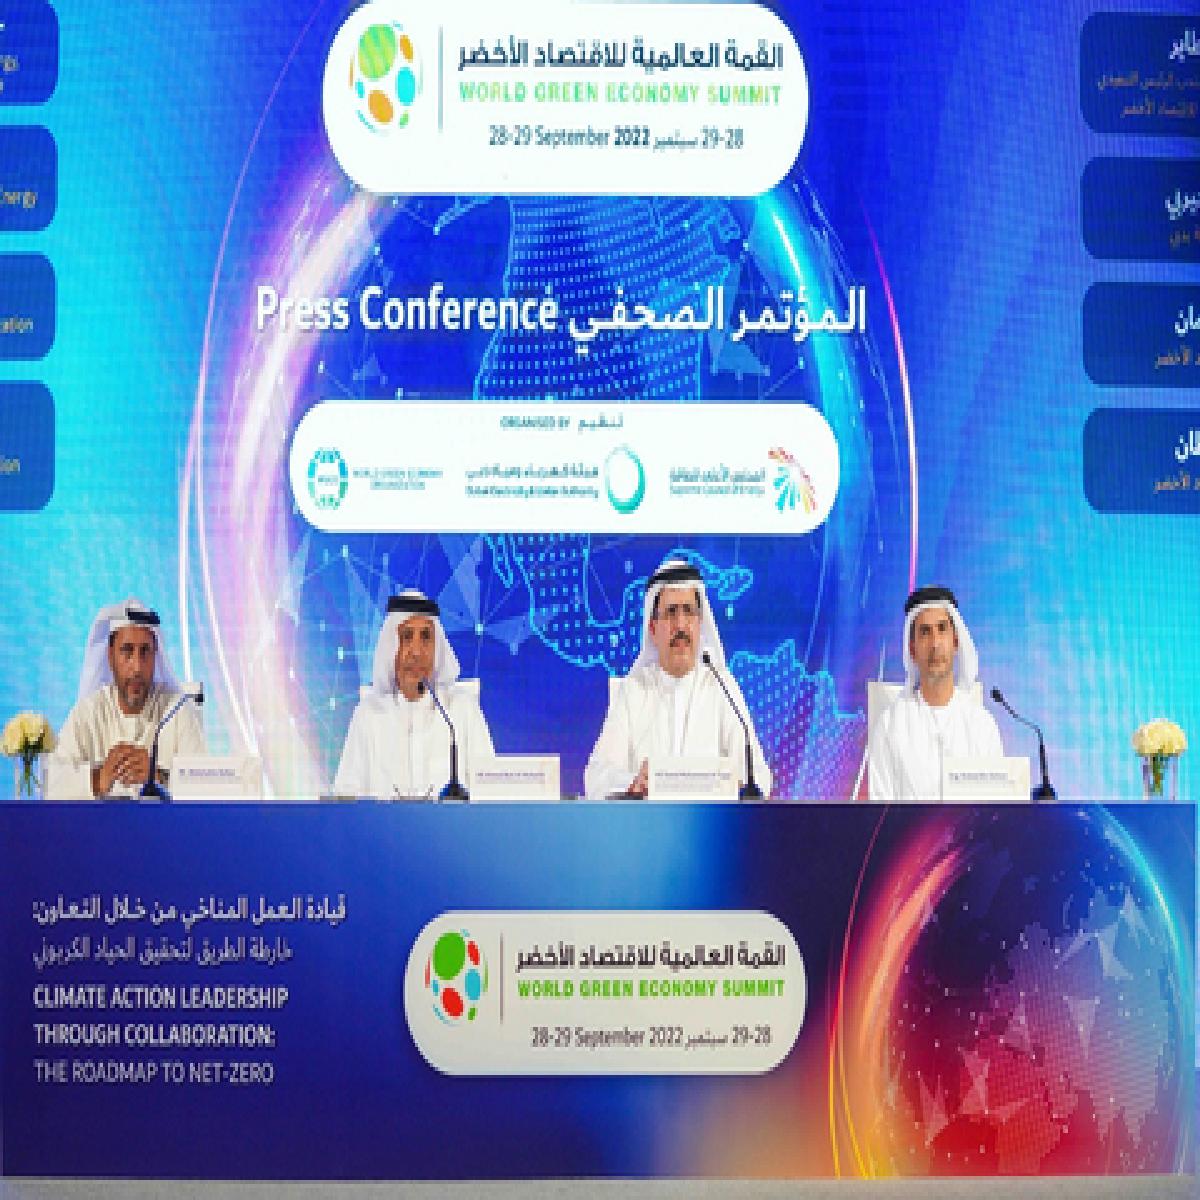 DEWA and WGEO Complete Preparations for 8th Edition of the World Green Economy Summit